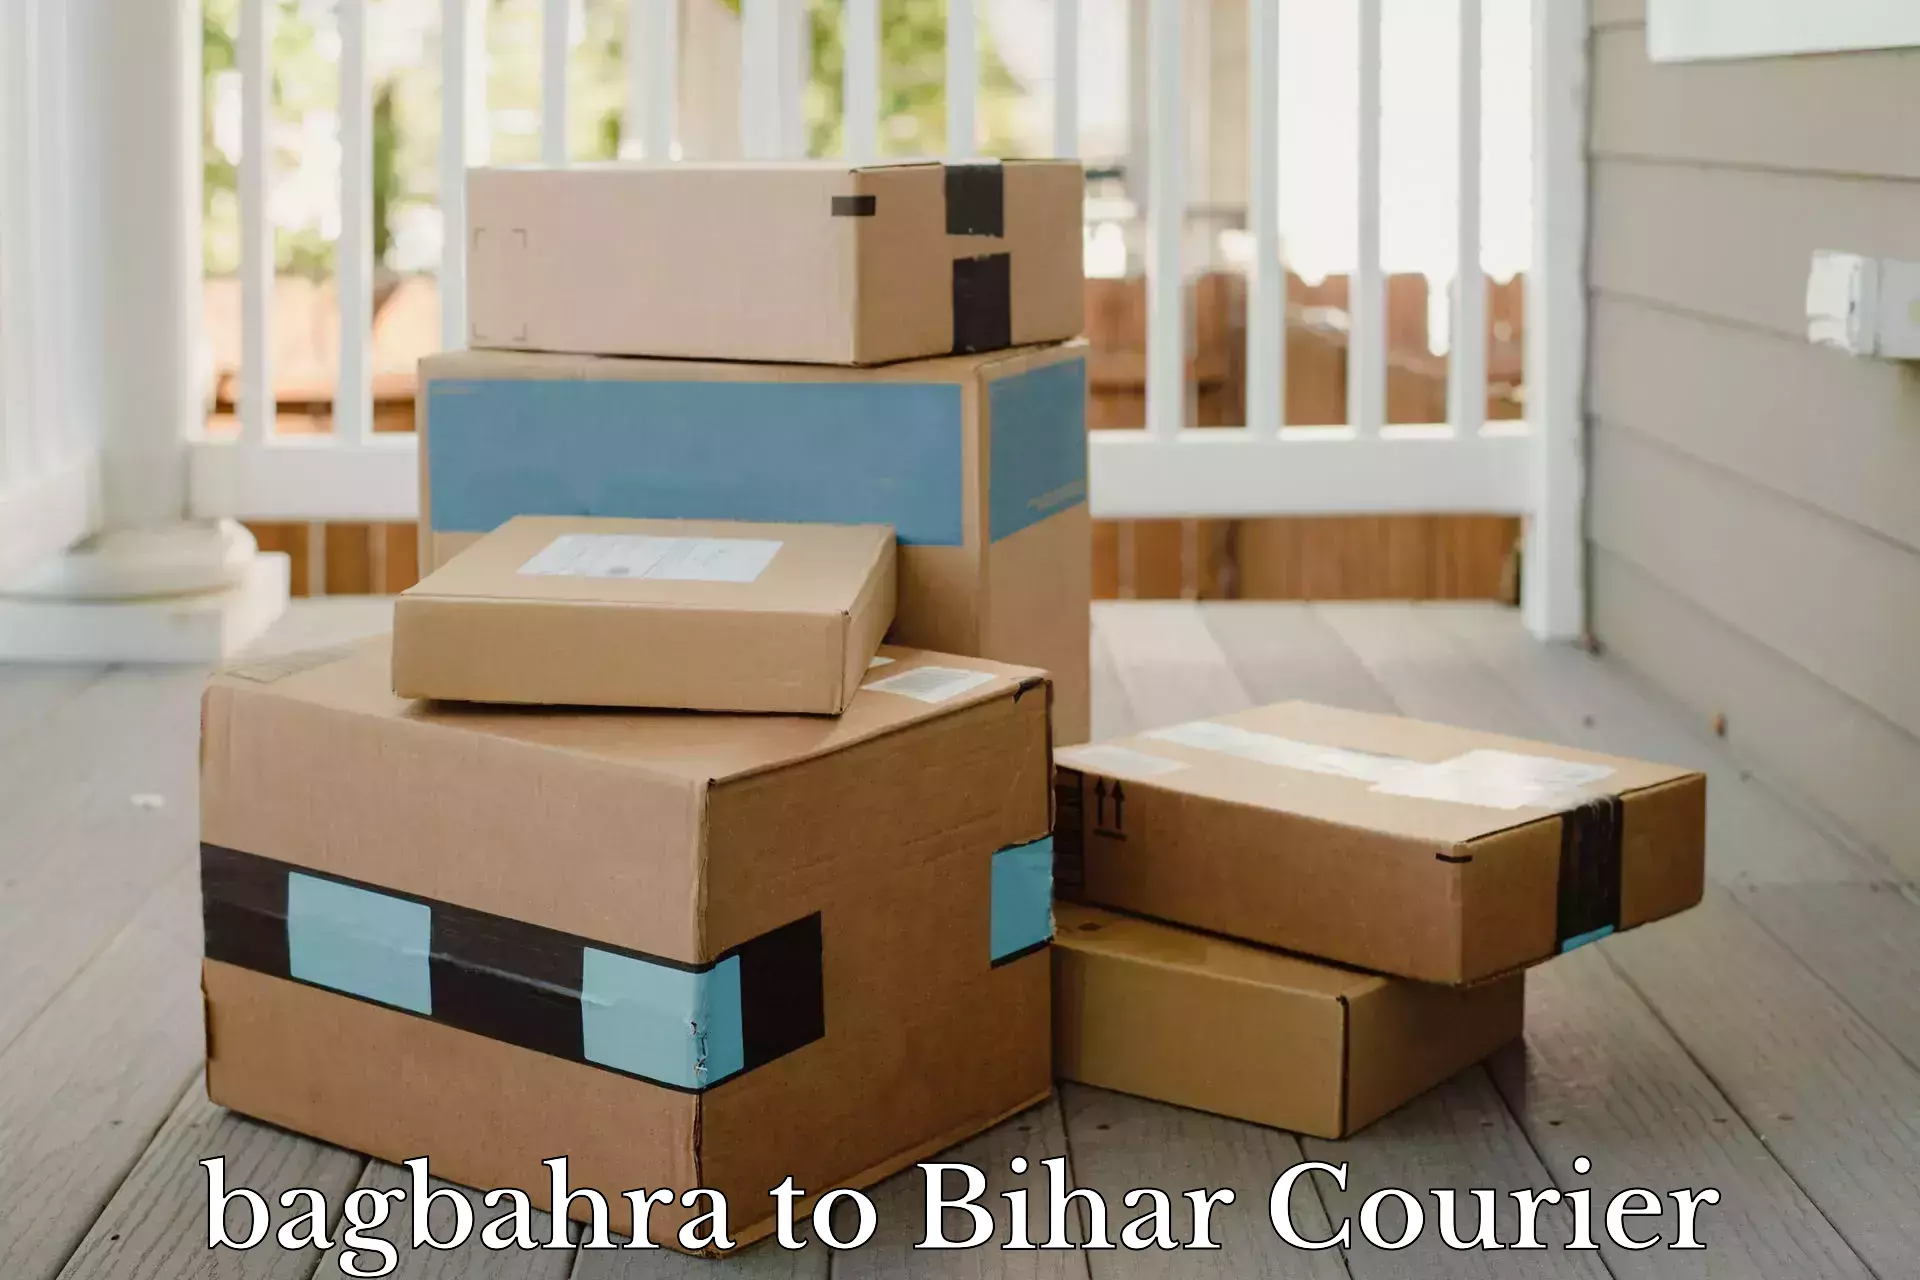 Customer-focused courier bagbahra to Bihar